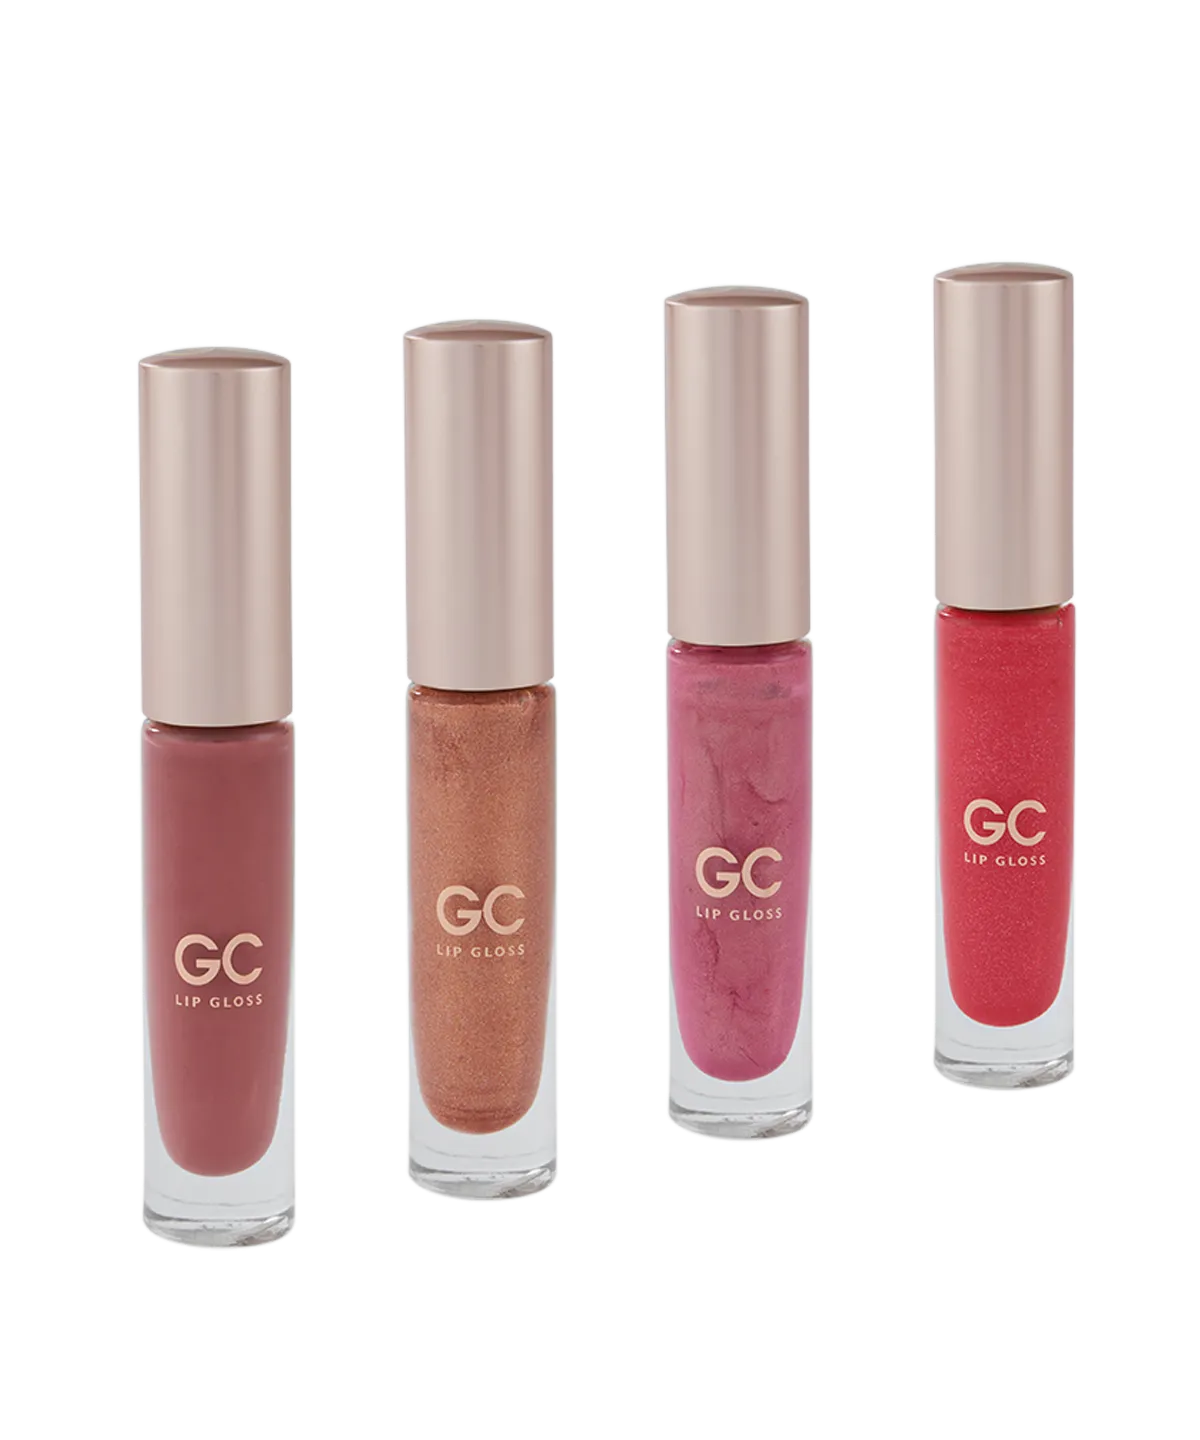 Lip Gloss Dolce Diva Red - Gil Cagné